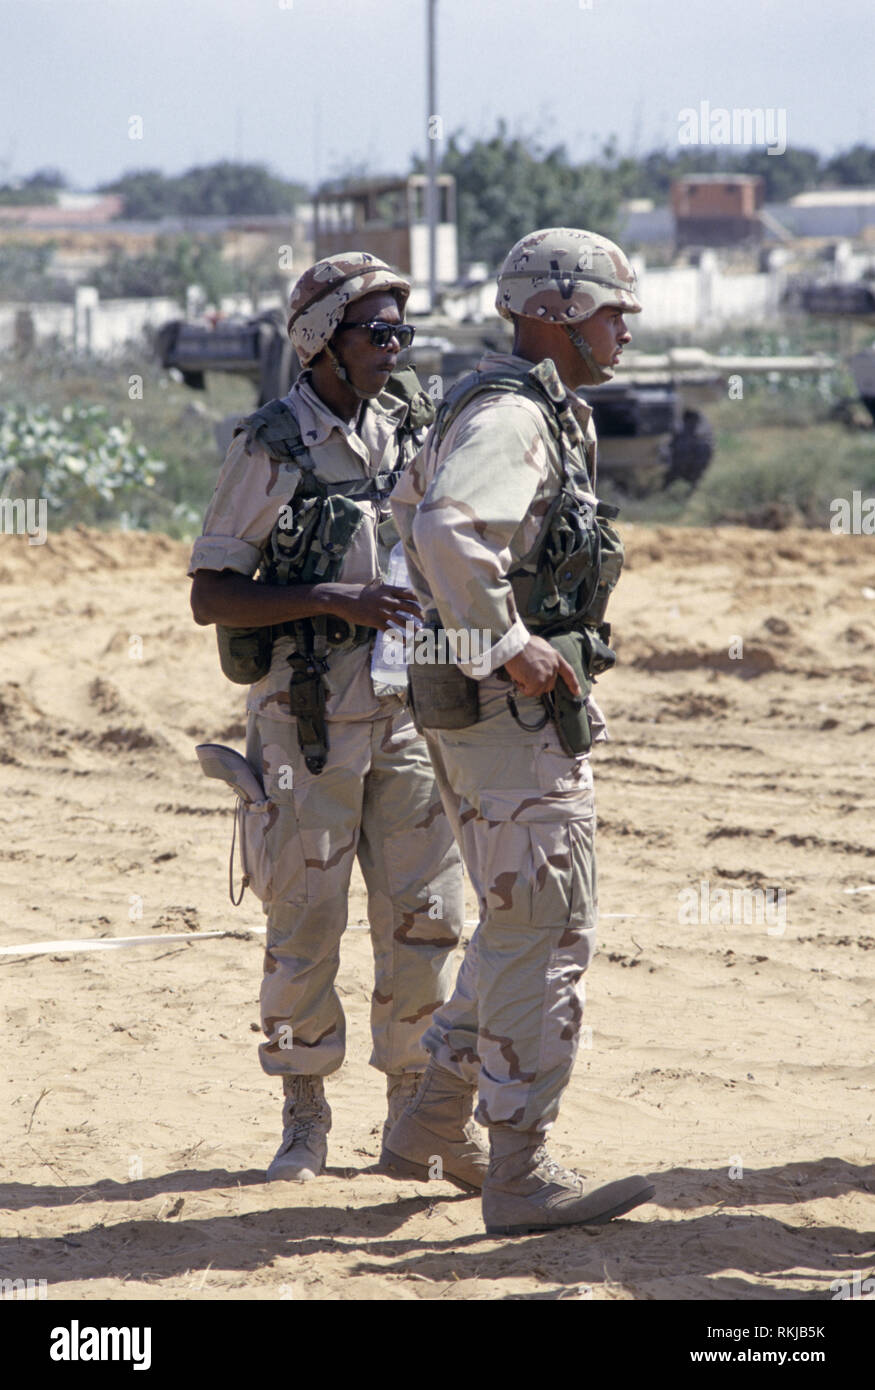 16th October 1993 U.S. Army infantry soldiers at UNOSOM Headquarters in Mogadishu, Somalia. In the background is an M1A1 Abrams tank of 1st Battalion of the 64th Armored Regiment. Stock Photo